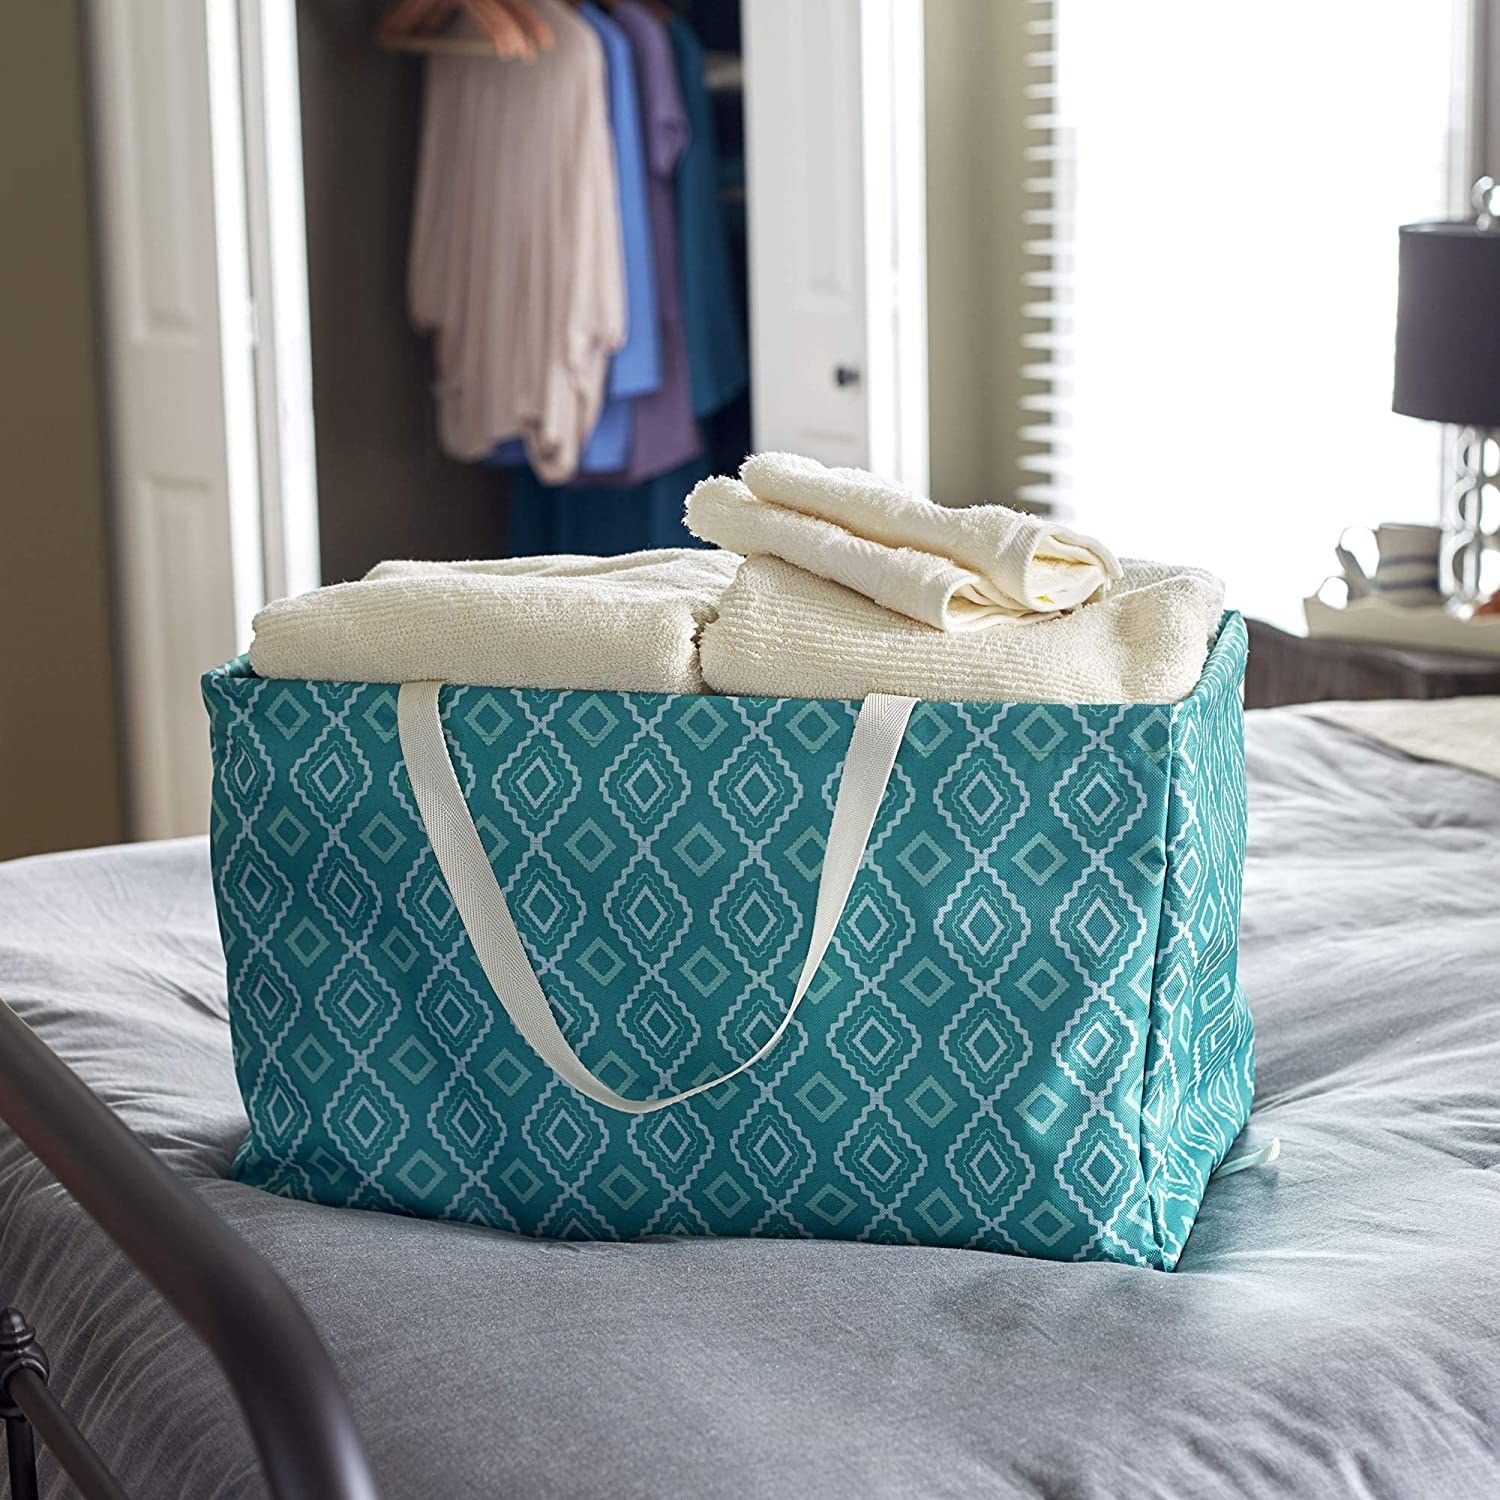 The utility tote with towels inside on a bed